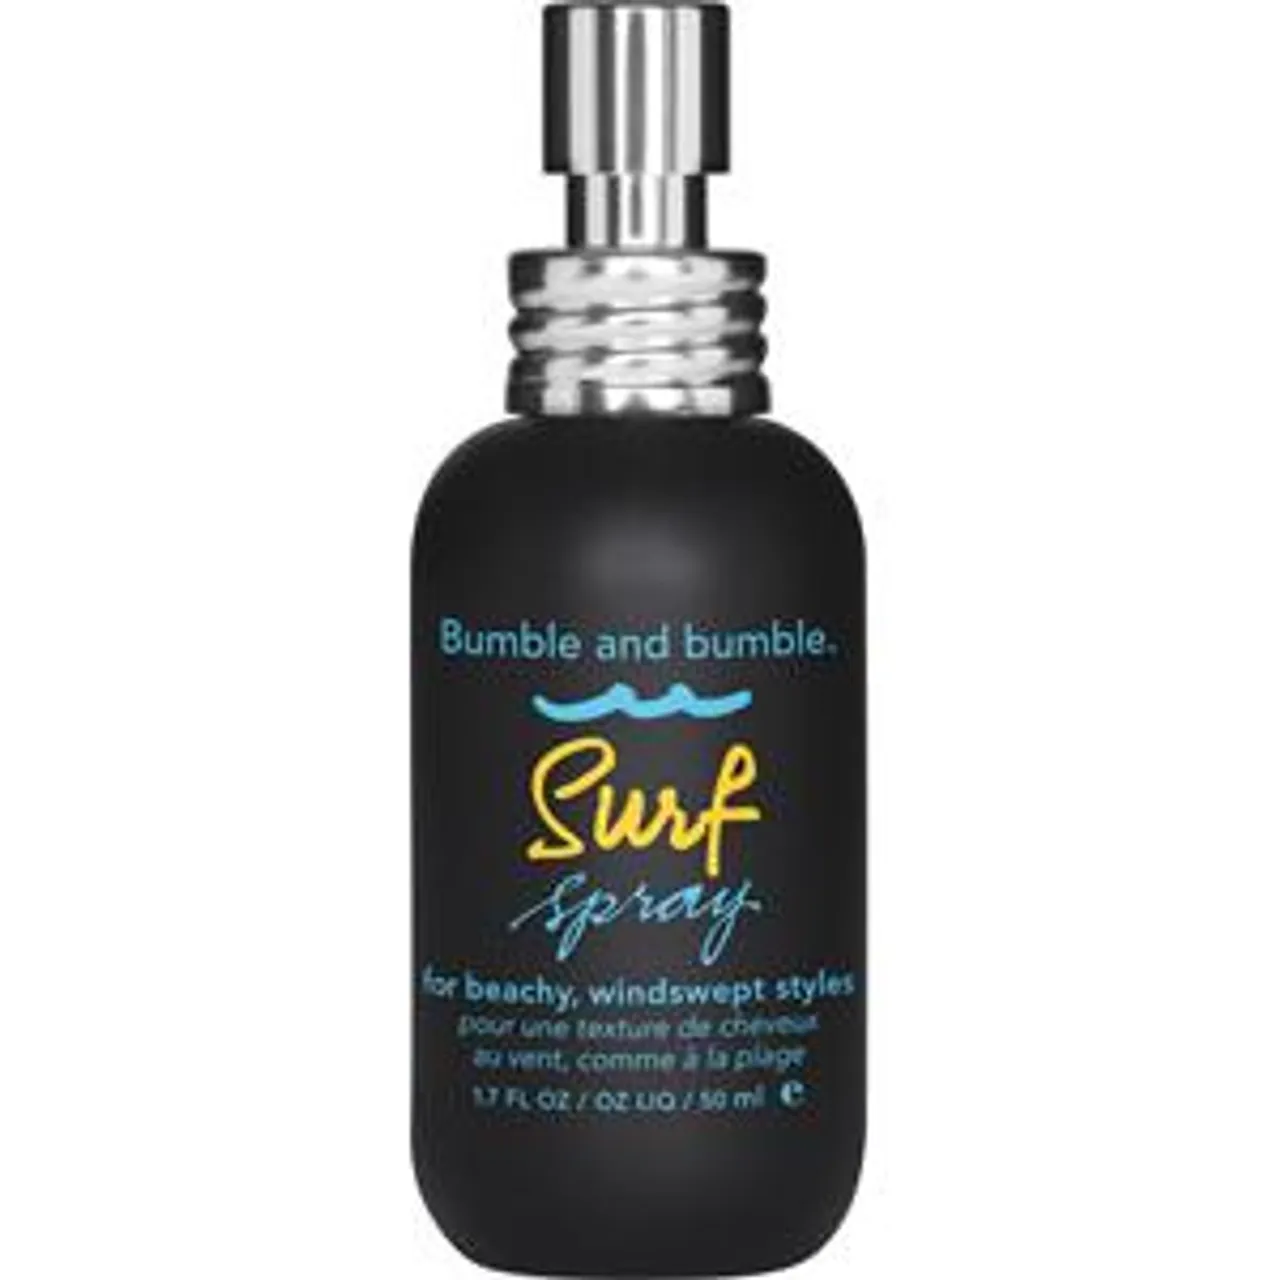 Bumble and bumble Surf Spray Female 50 ml